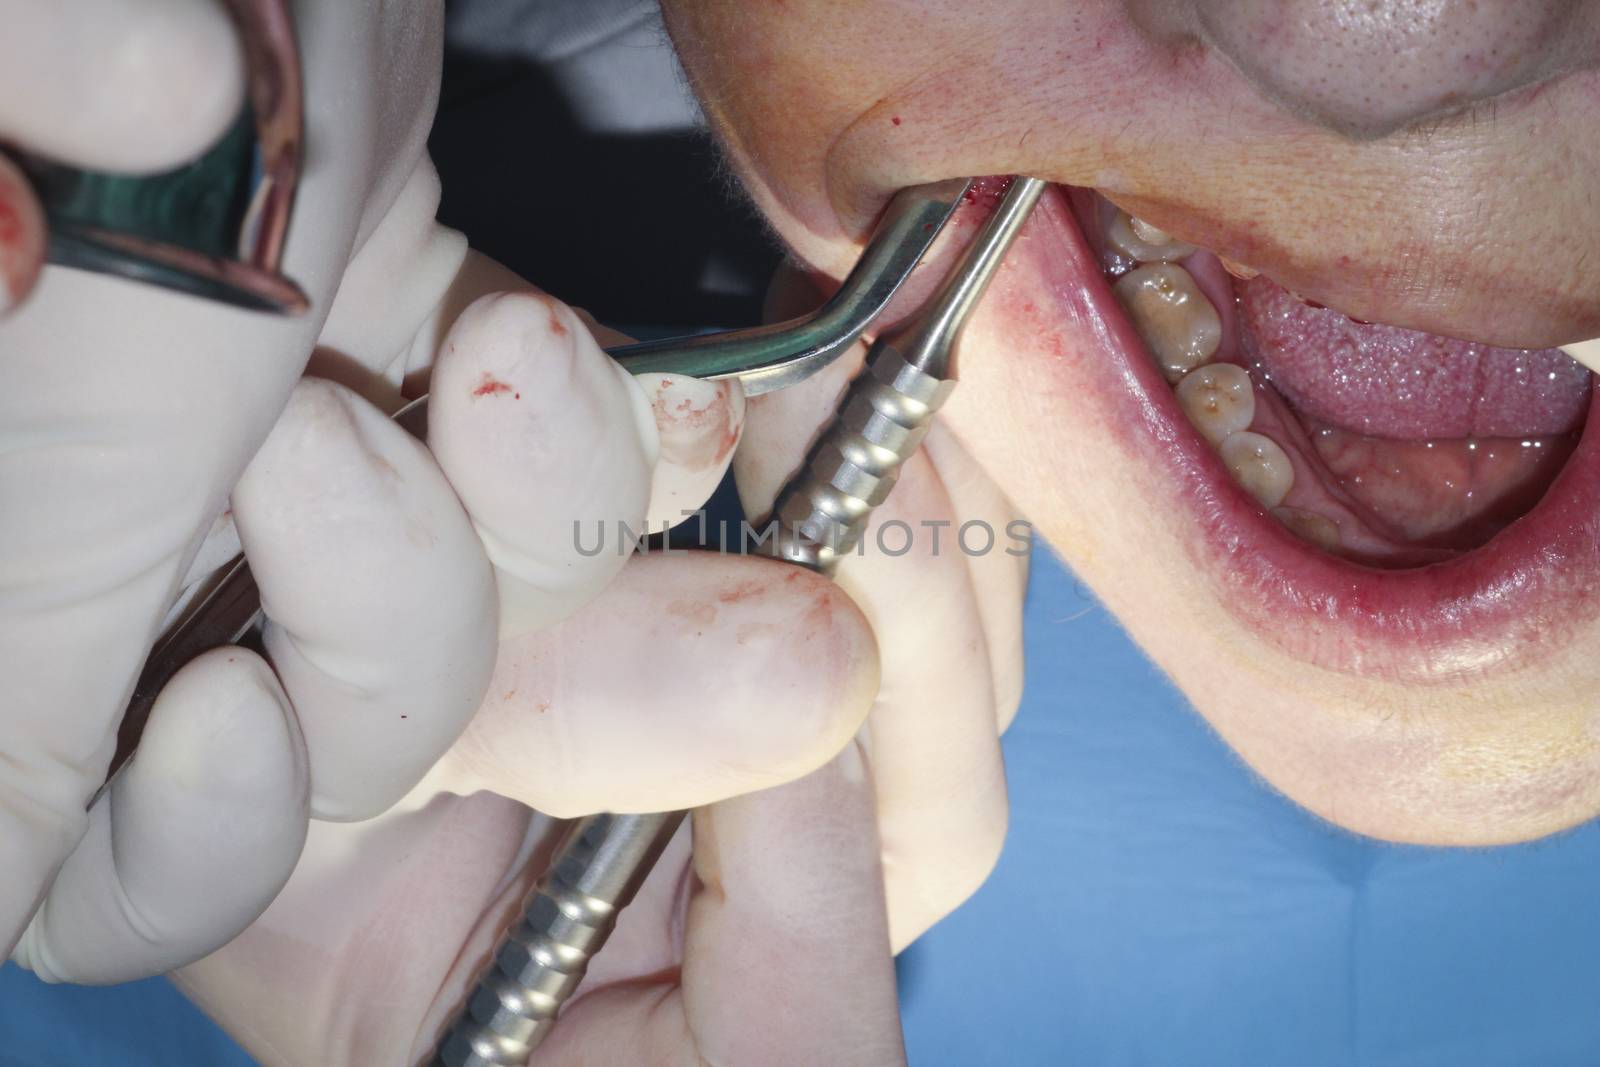 Surgical operation on the molars. Dental Implant by GemaIbarra